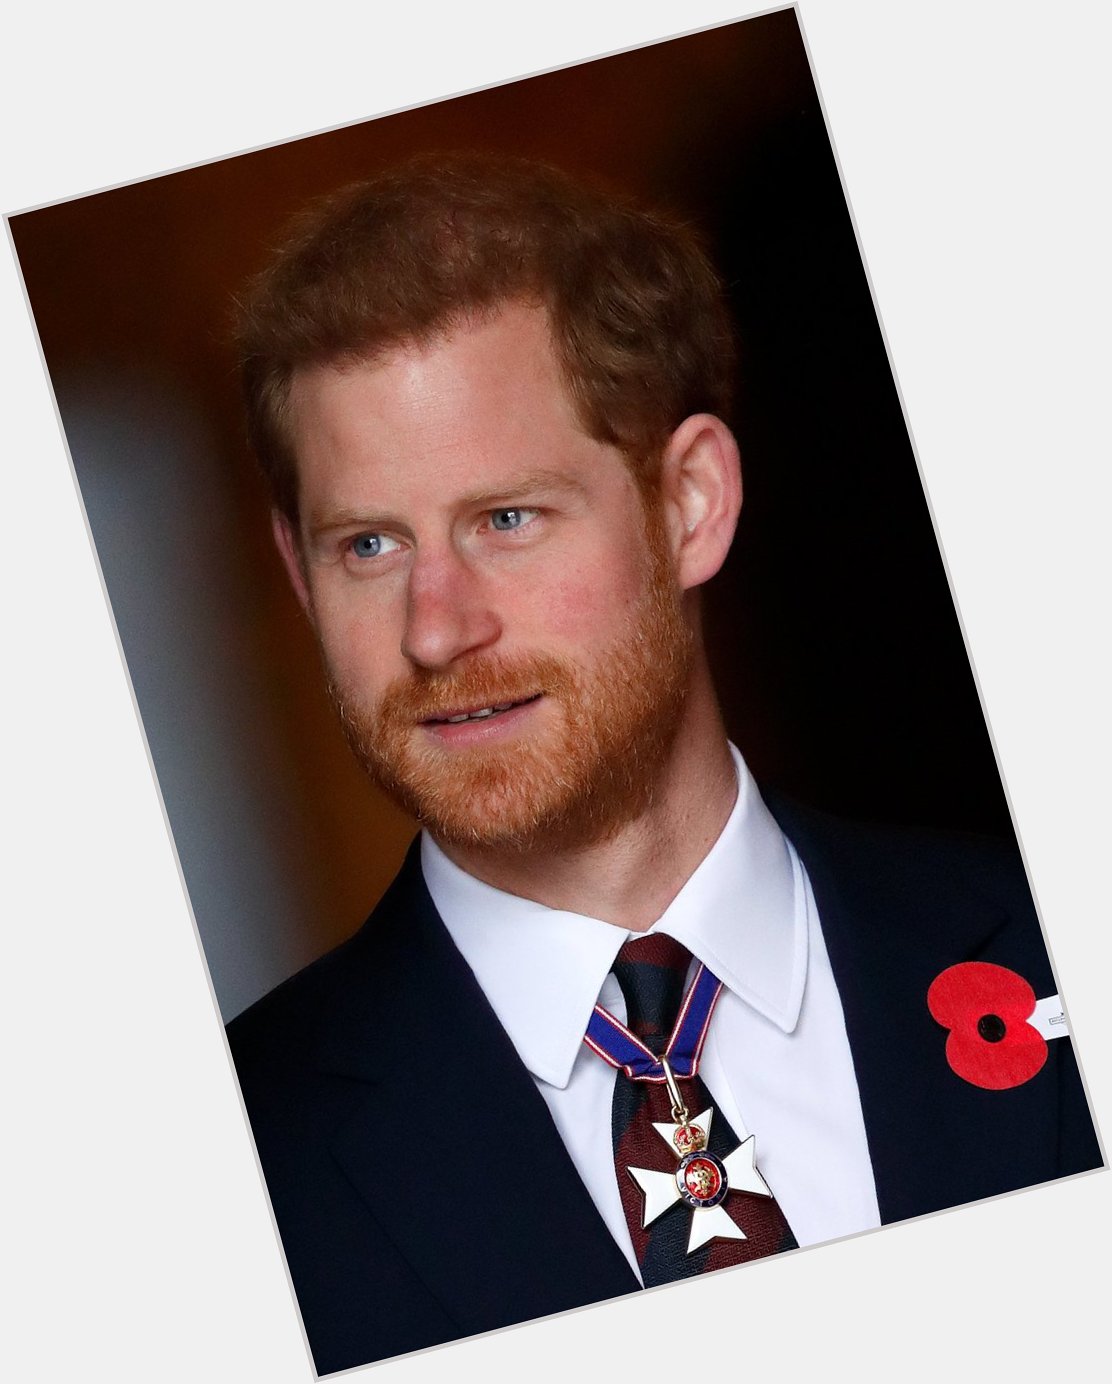 Happy Birthday Prince Harry! Best wishes today and always! 